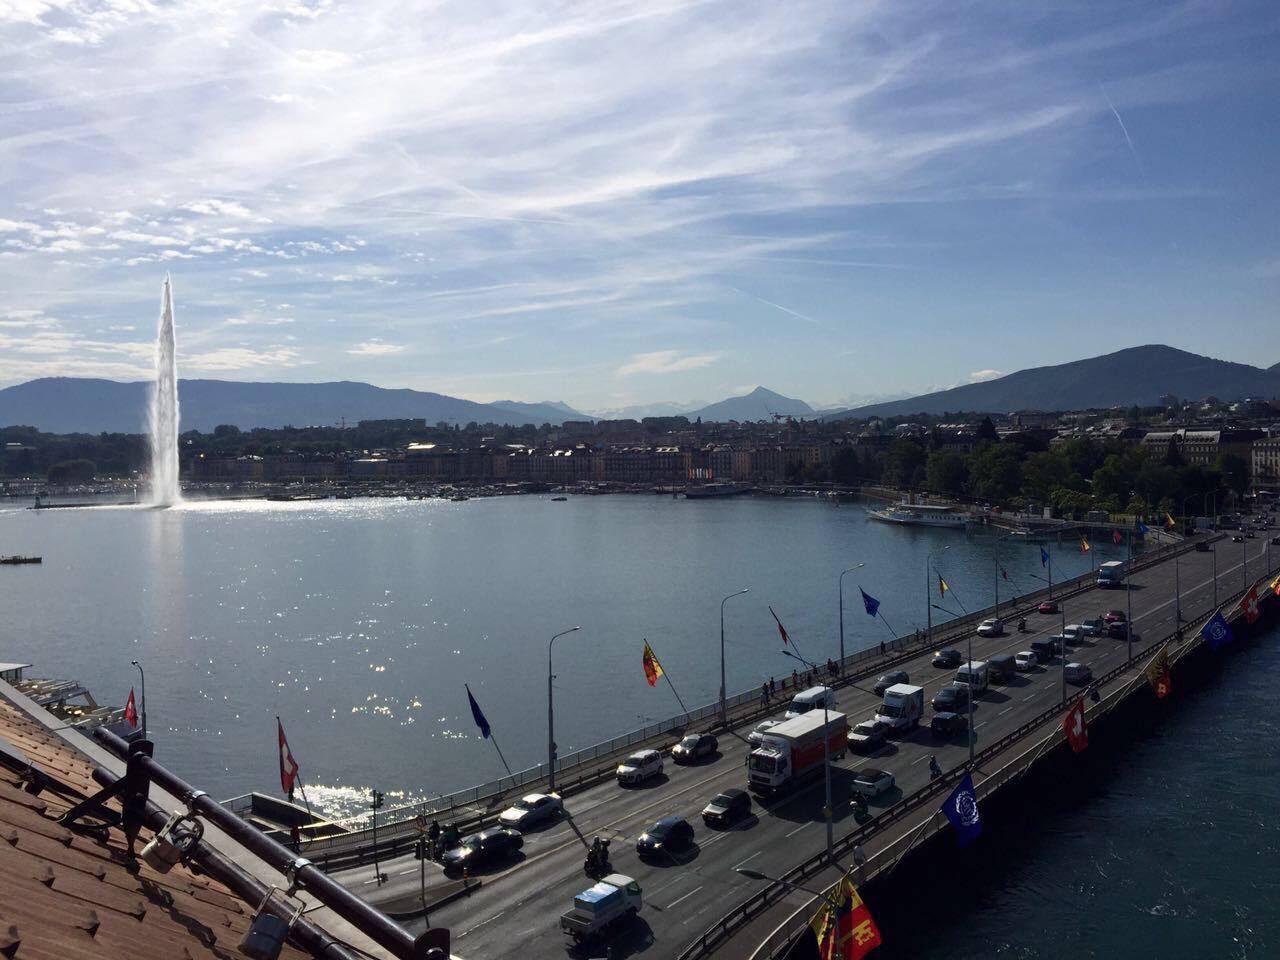  The  Jet d'Eau  (left) is large vertical water fountain at the point of intersection between  Lake Geneva  and the      
  
 
  
     
  
 Normal 
 0 
 
 
 
 10 pt 
 0 
 2 
 
 false 
 false 
 false 
 
 EN-US 
 ZH-CN 
 X-NONE 
 
  
  
  
  
  
  
  
